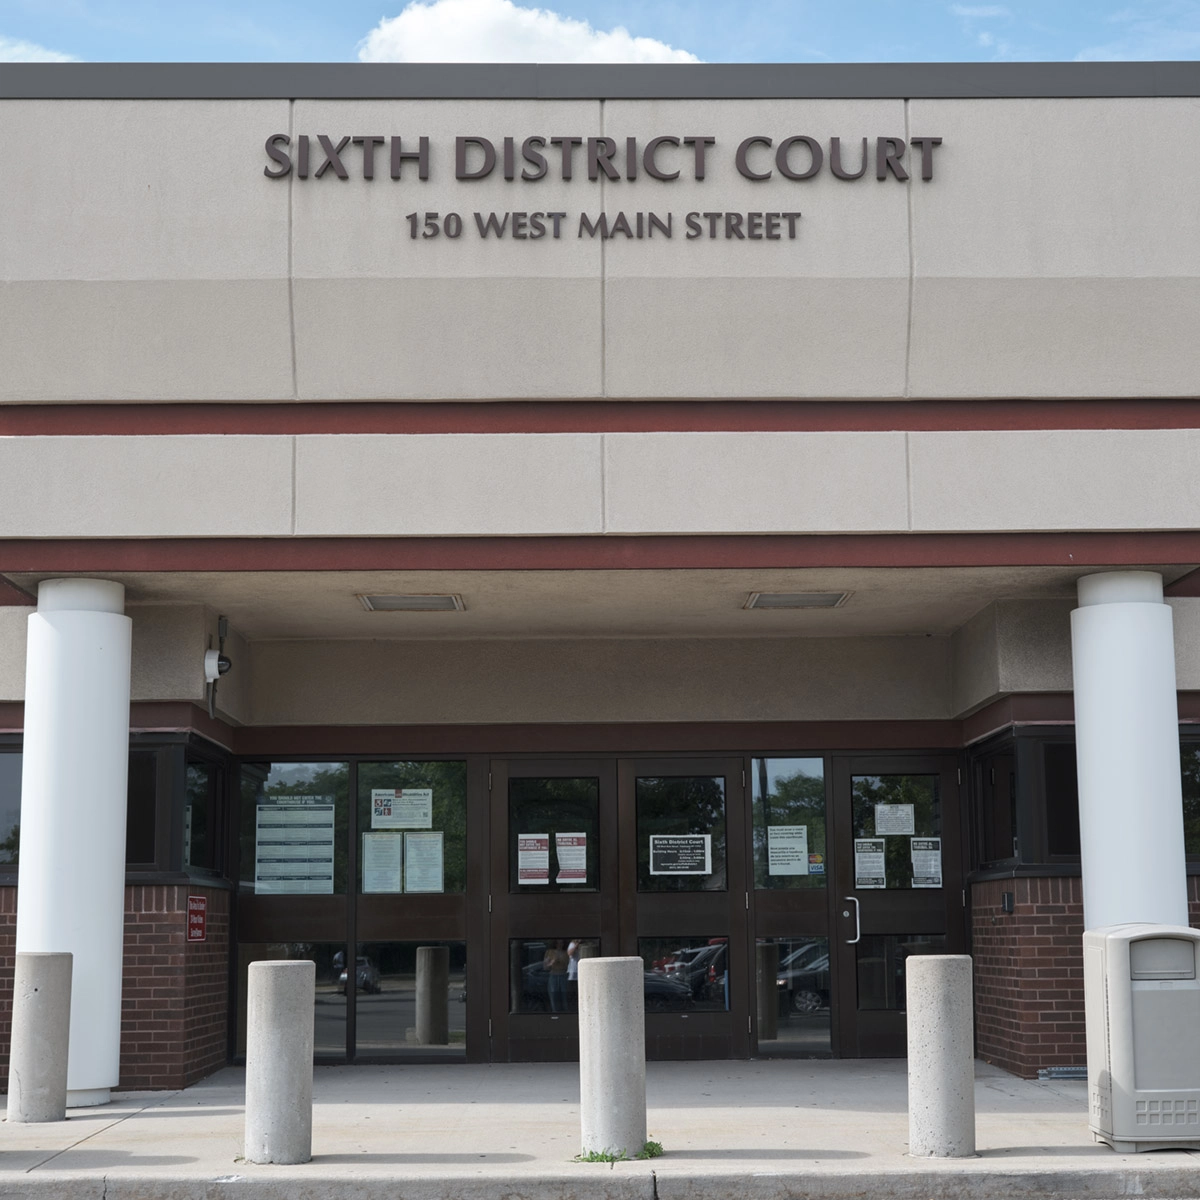 suffolk county district court, patchogue